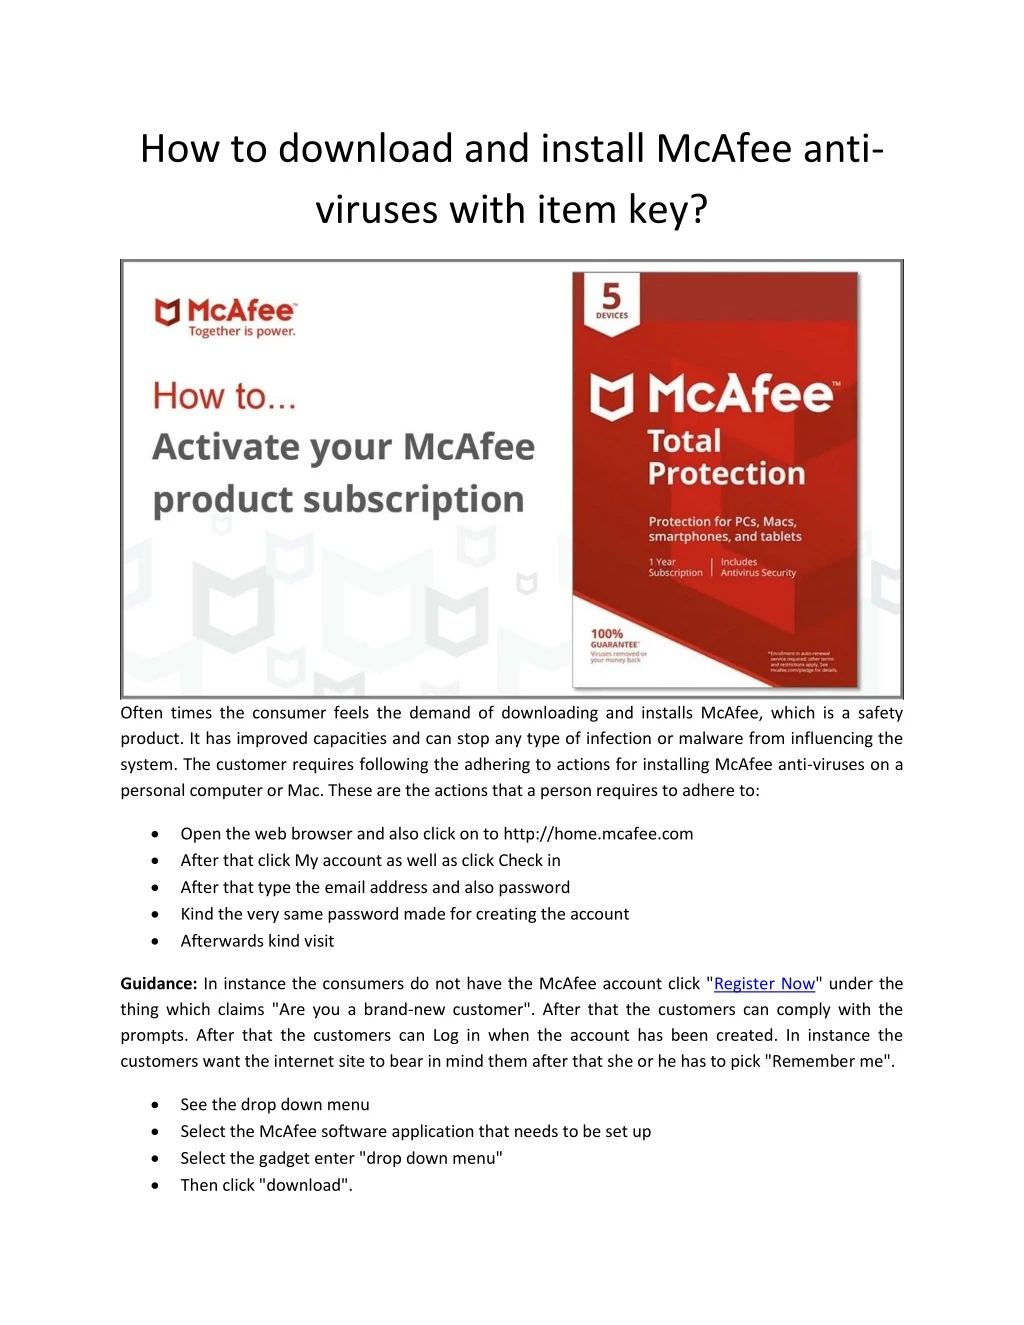 how to download and install mcafee anti viruses